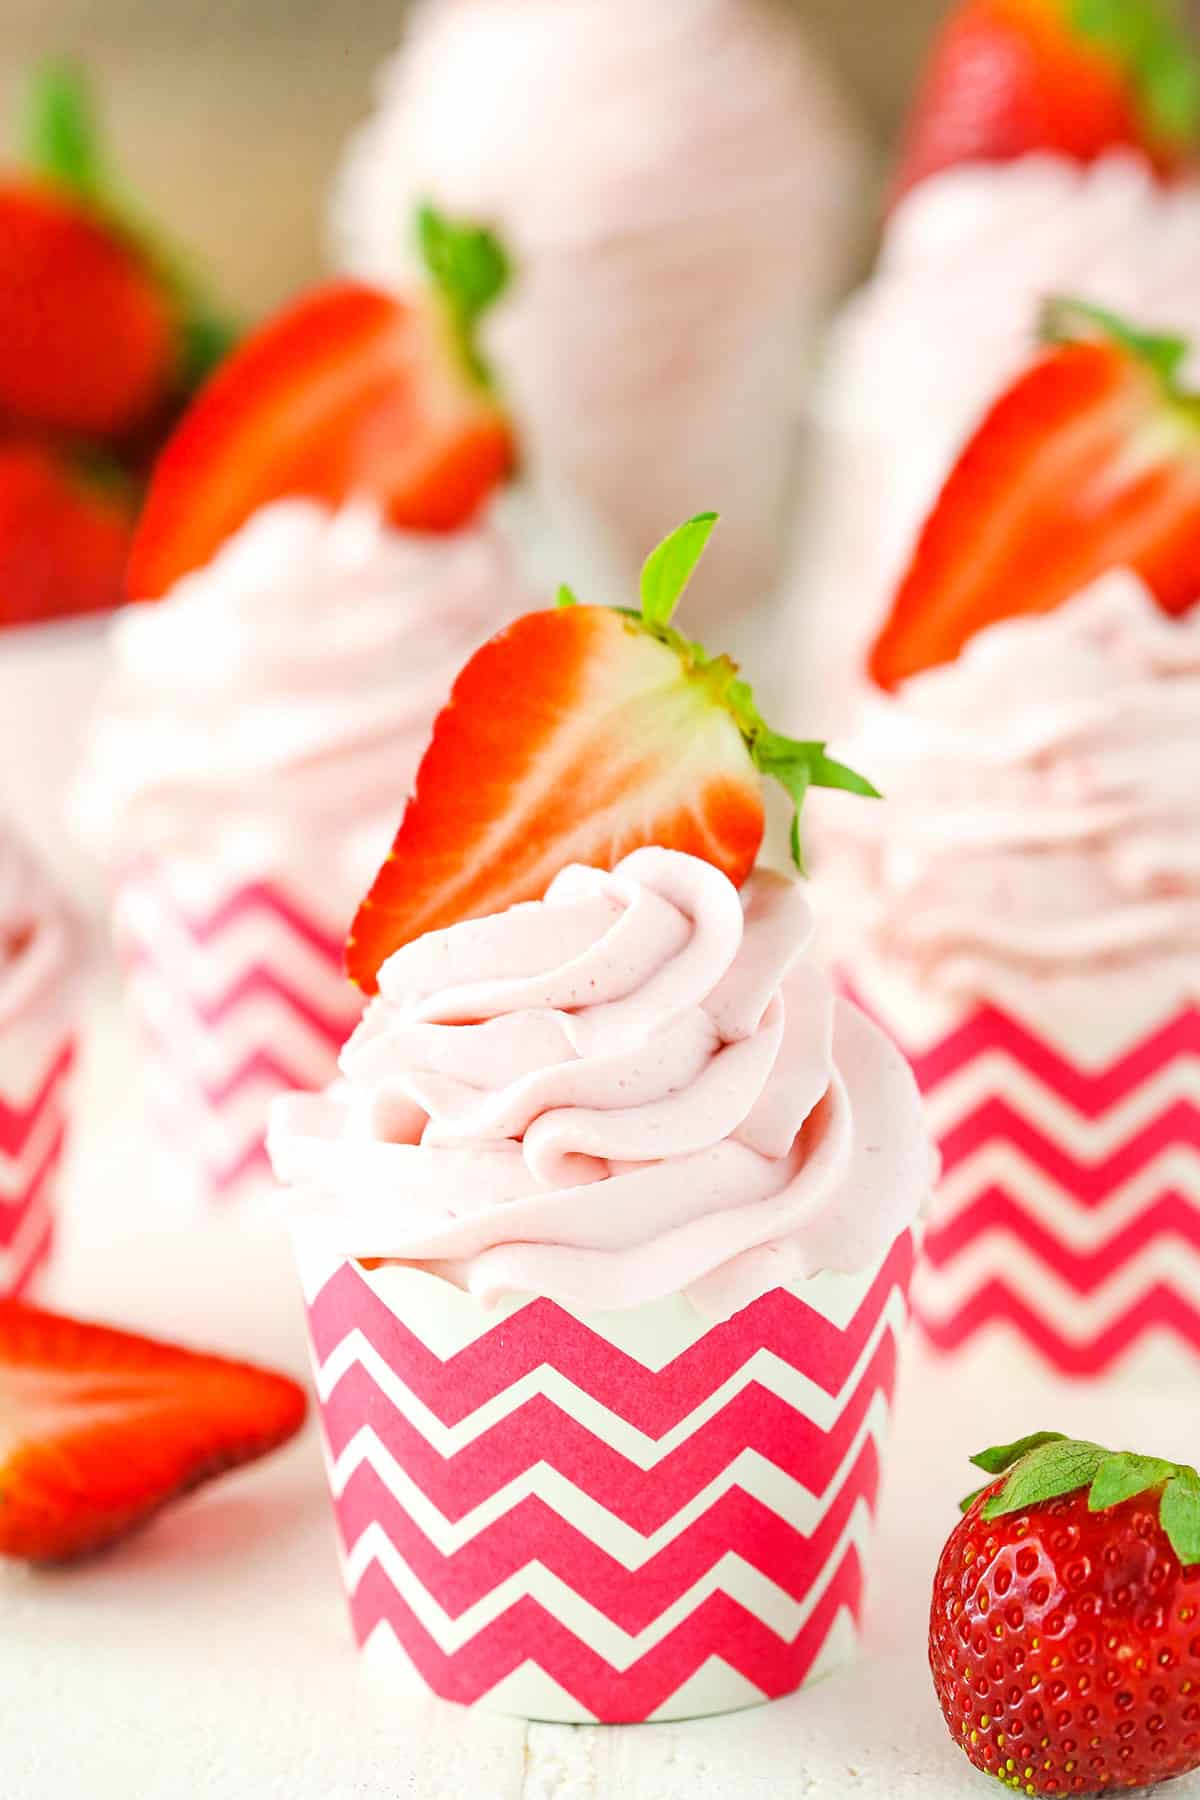 Homemade Strawberry Whipped Cream piped into a cupcake wrapper